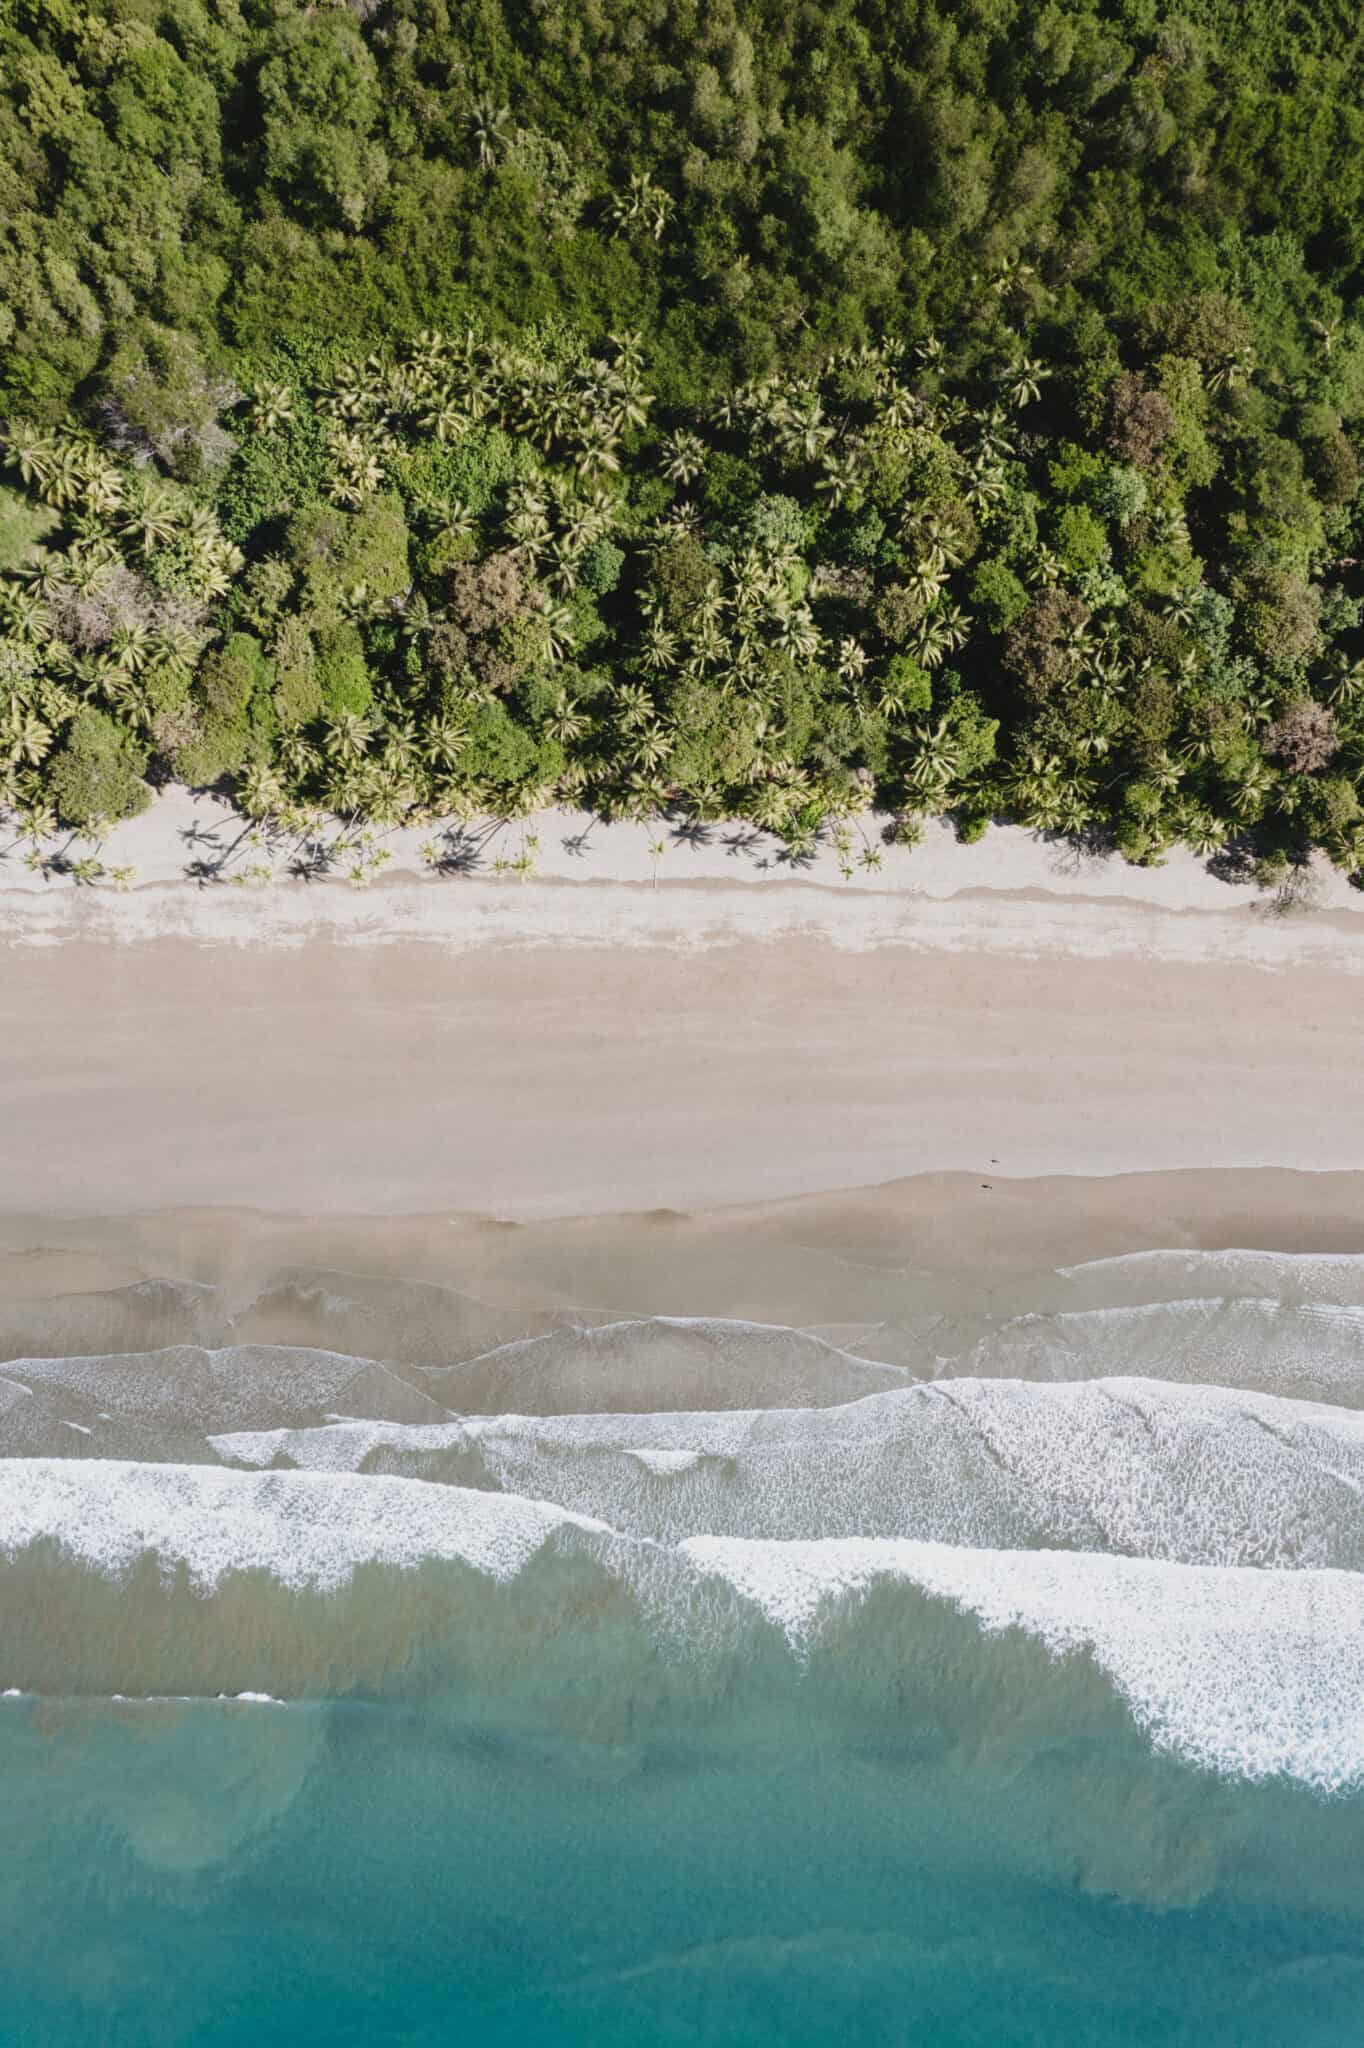 An aerial view of a beach in Uvita, Costa Rica with trees in the background.